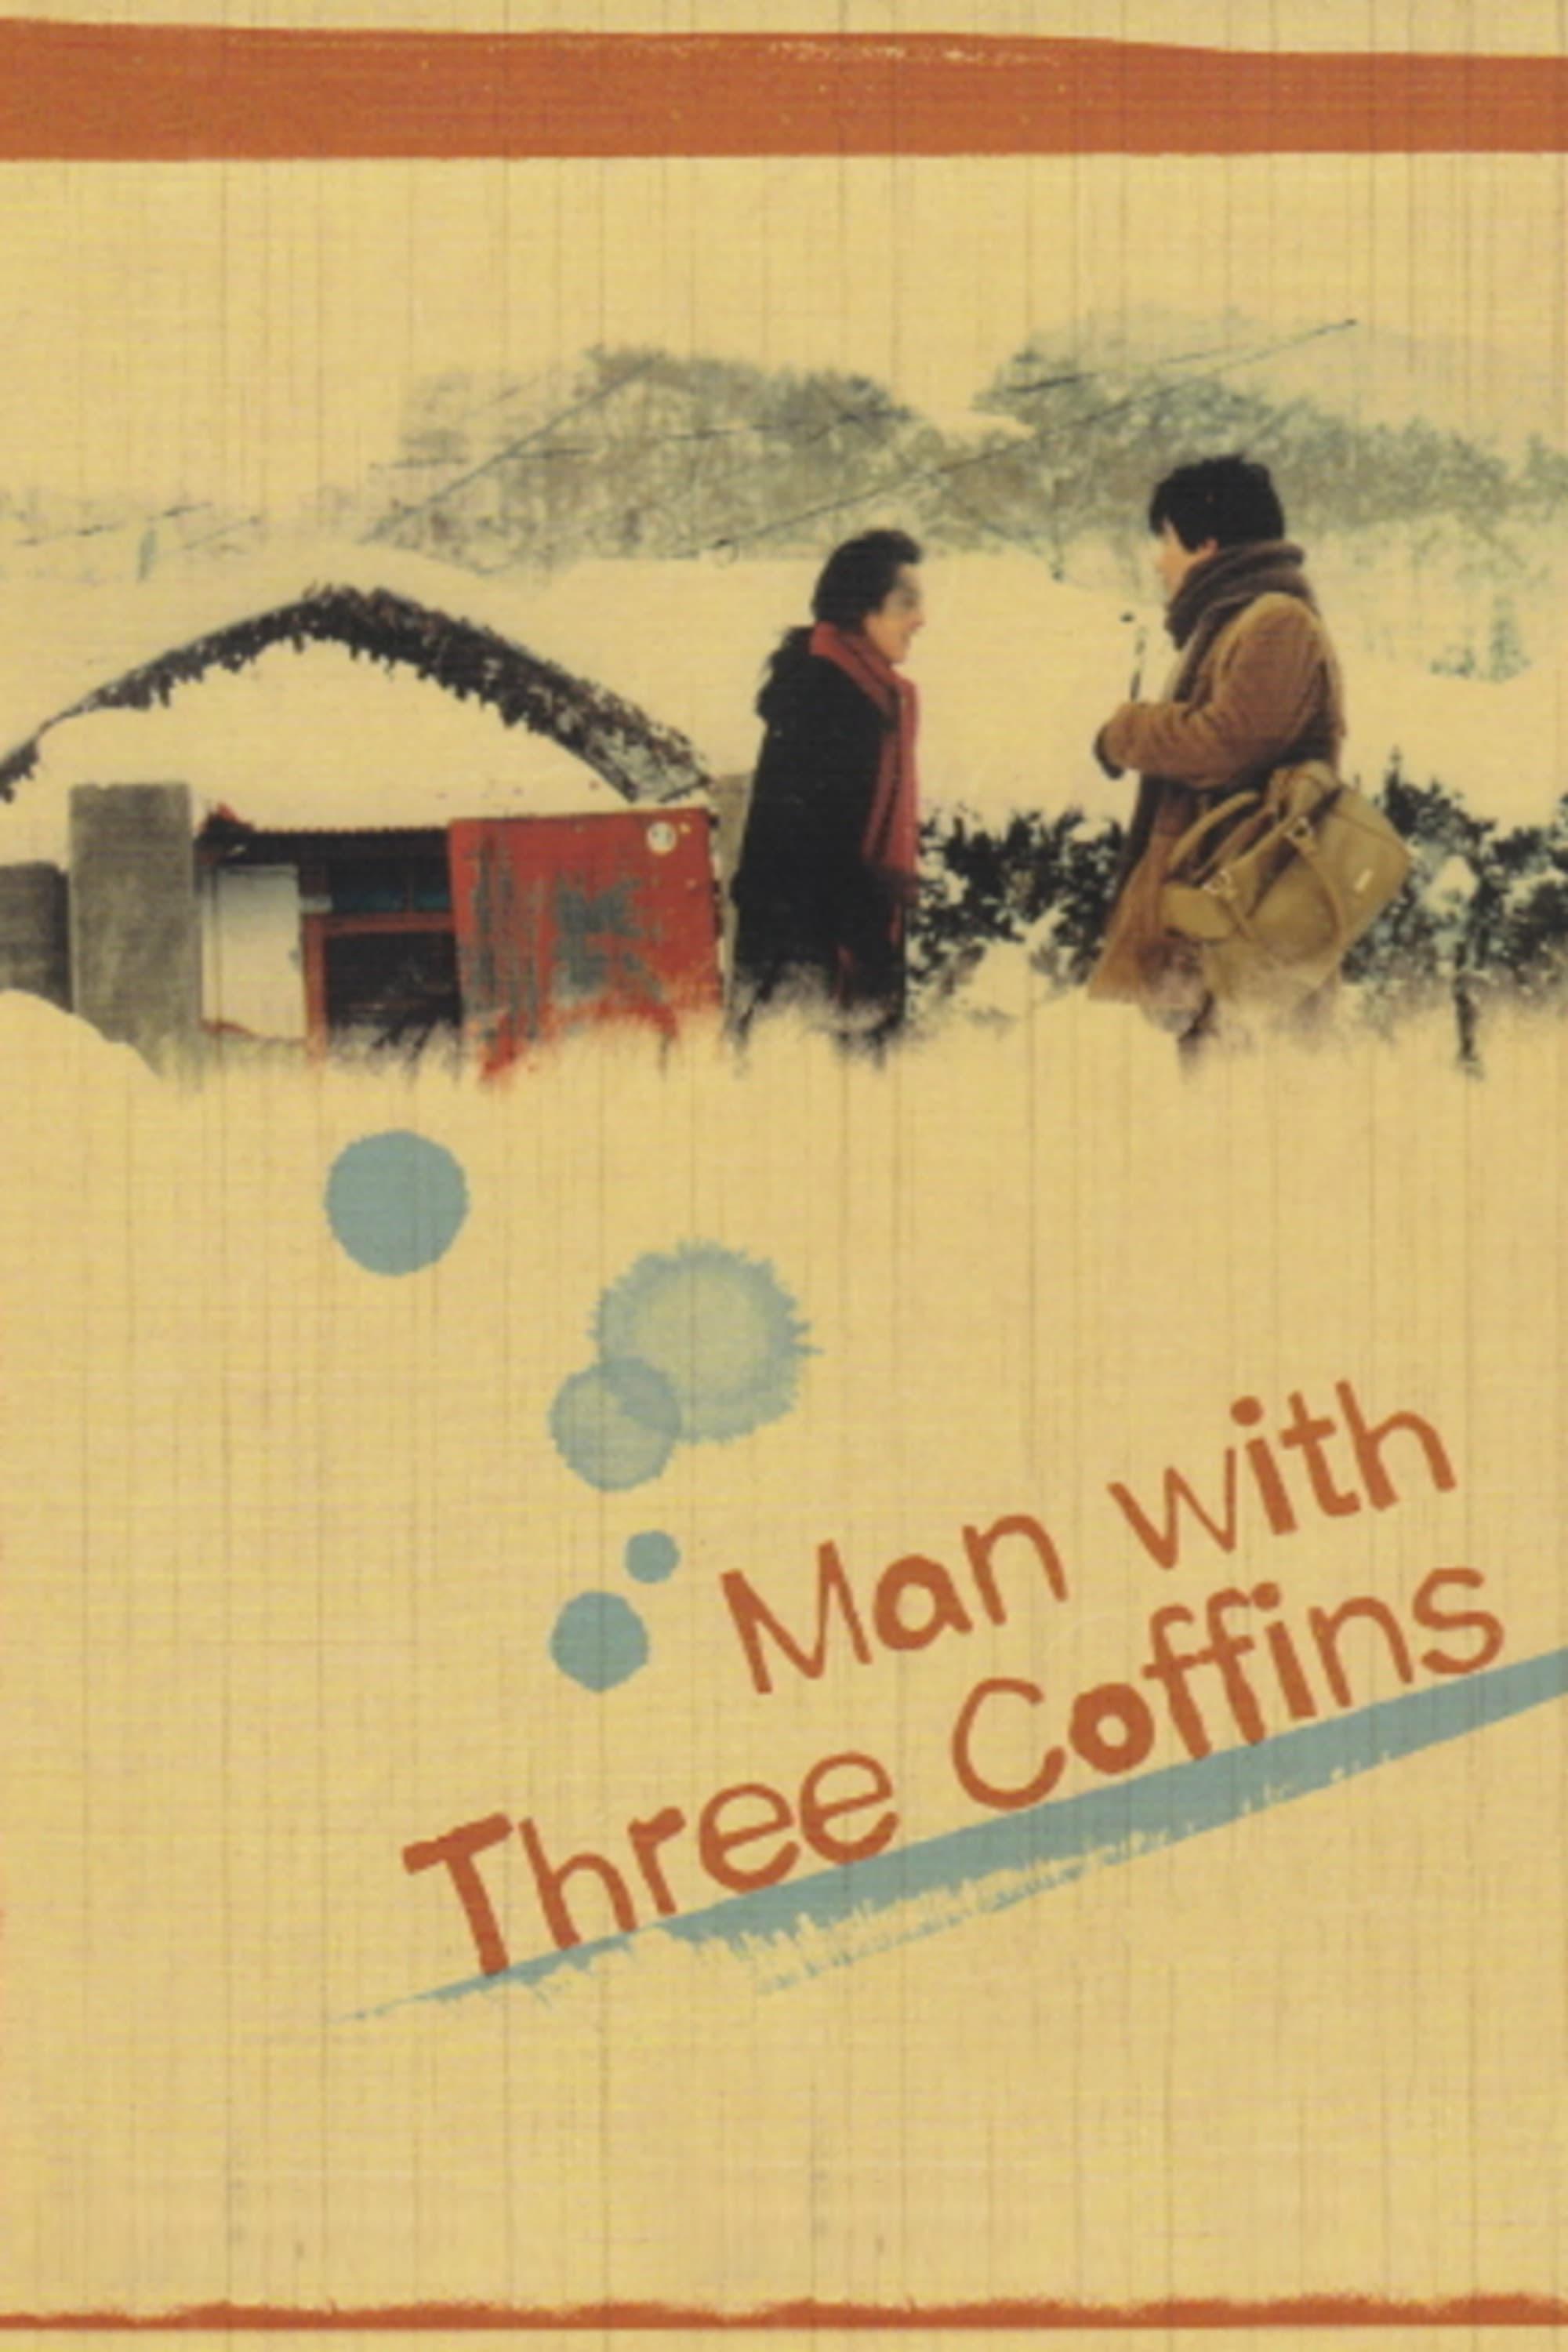 The Man with Three Coffins poster